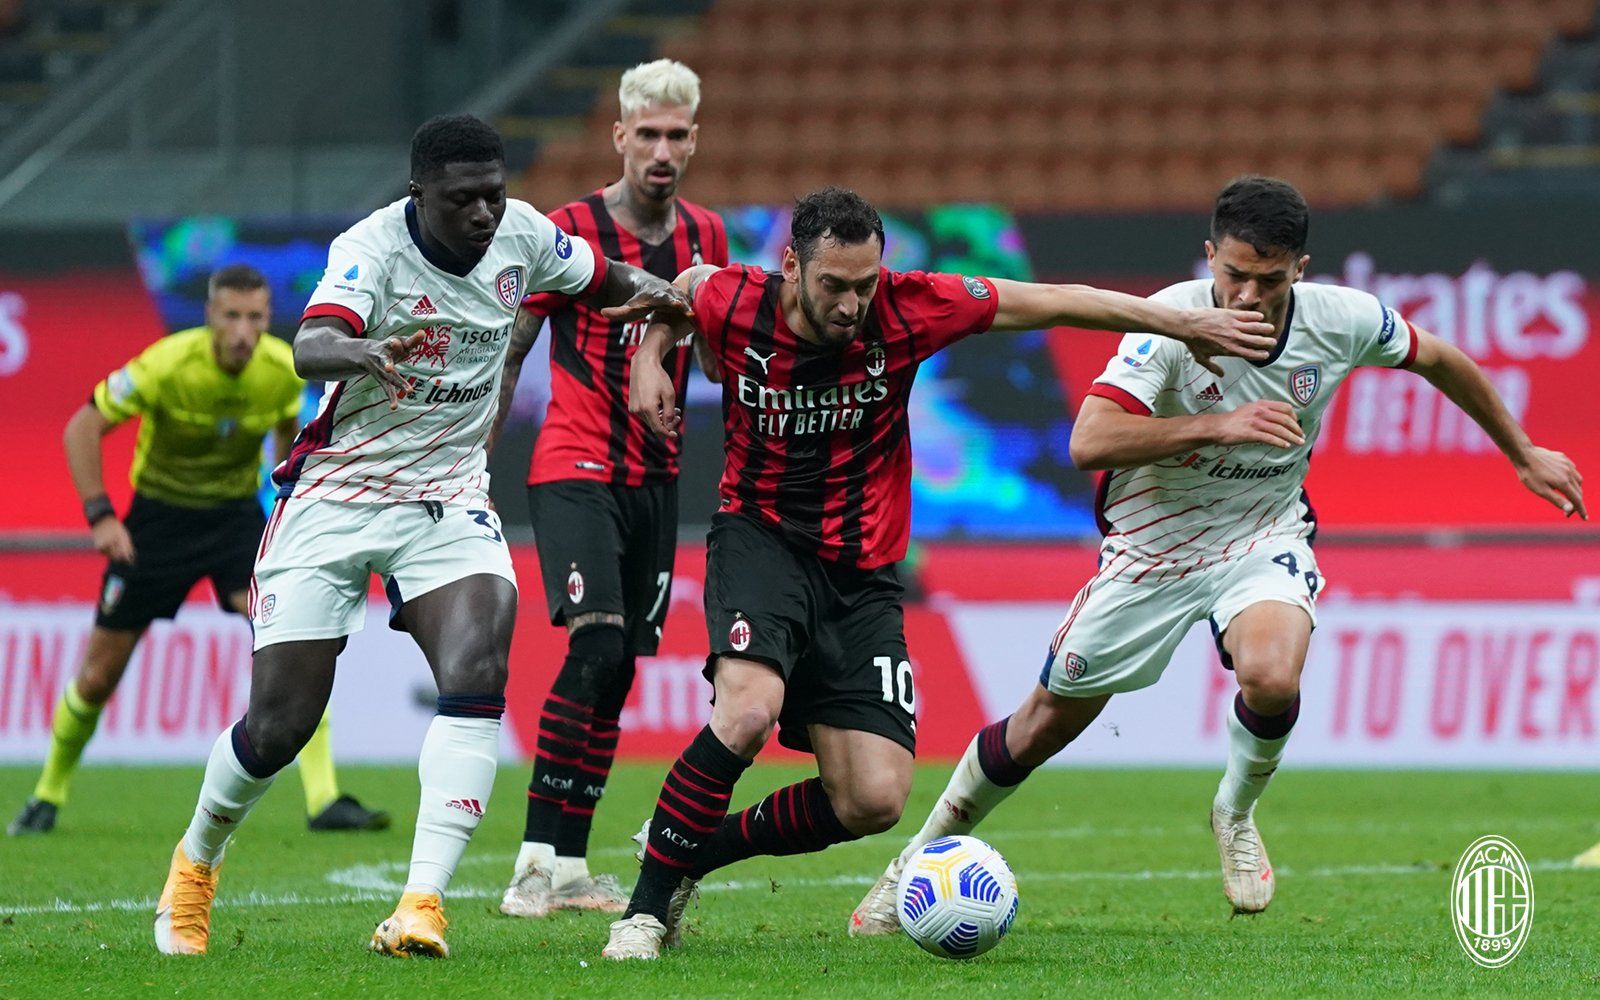 AC Milan held for draw by Cagliari, Champions League berth in doubt